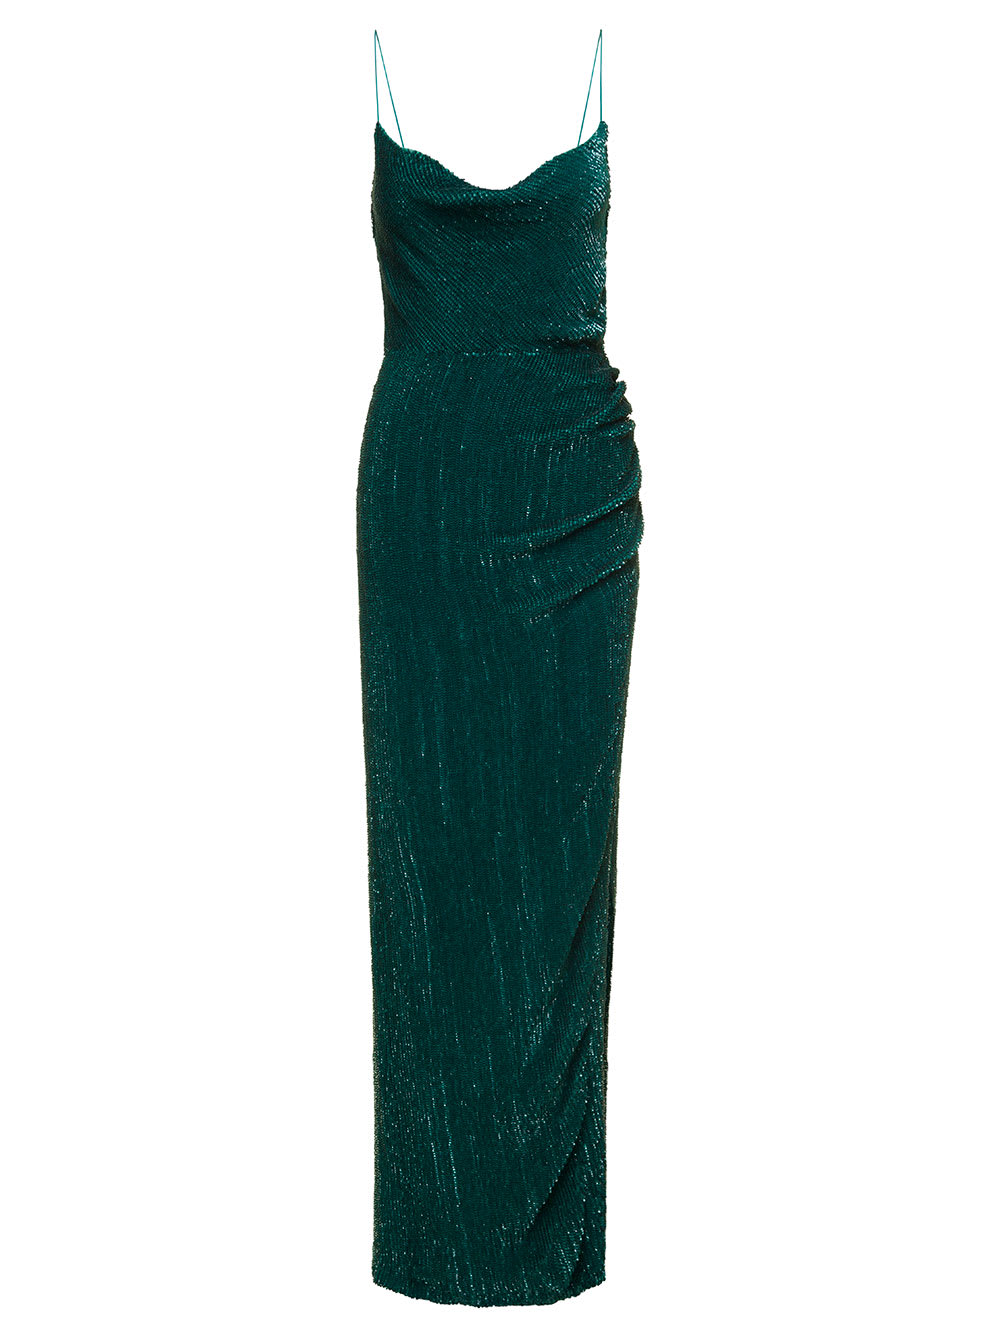 RETROFÉTE KATYA LONG GREEN DRESS WITH ALL-OVER PAILLETTES IN VISCOSE WOMAN RETROFETE